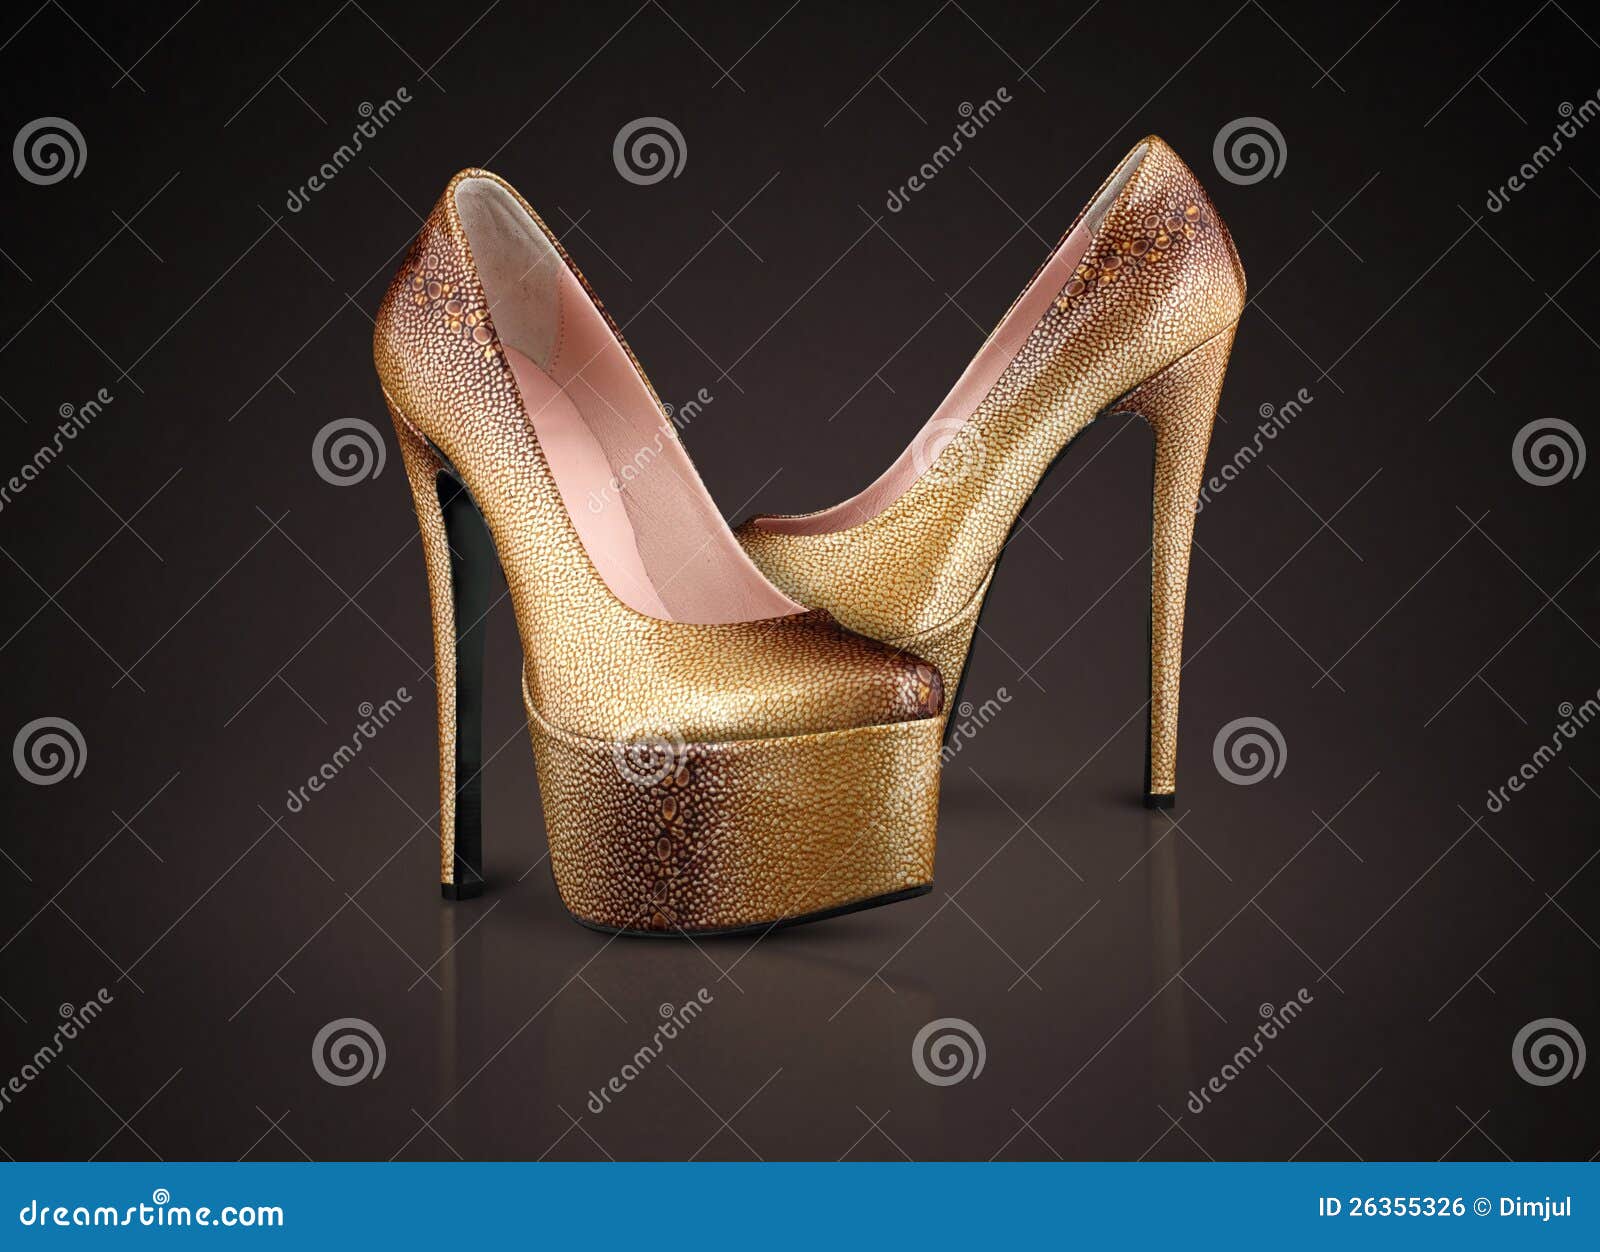 Premium Vector | Boots high heel shoe xmas merry tree gold red gold,  metallic, sparkle, effect, glamour